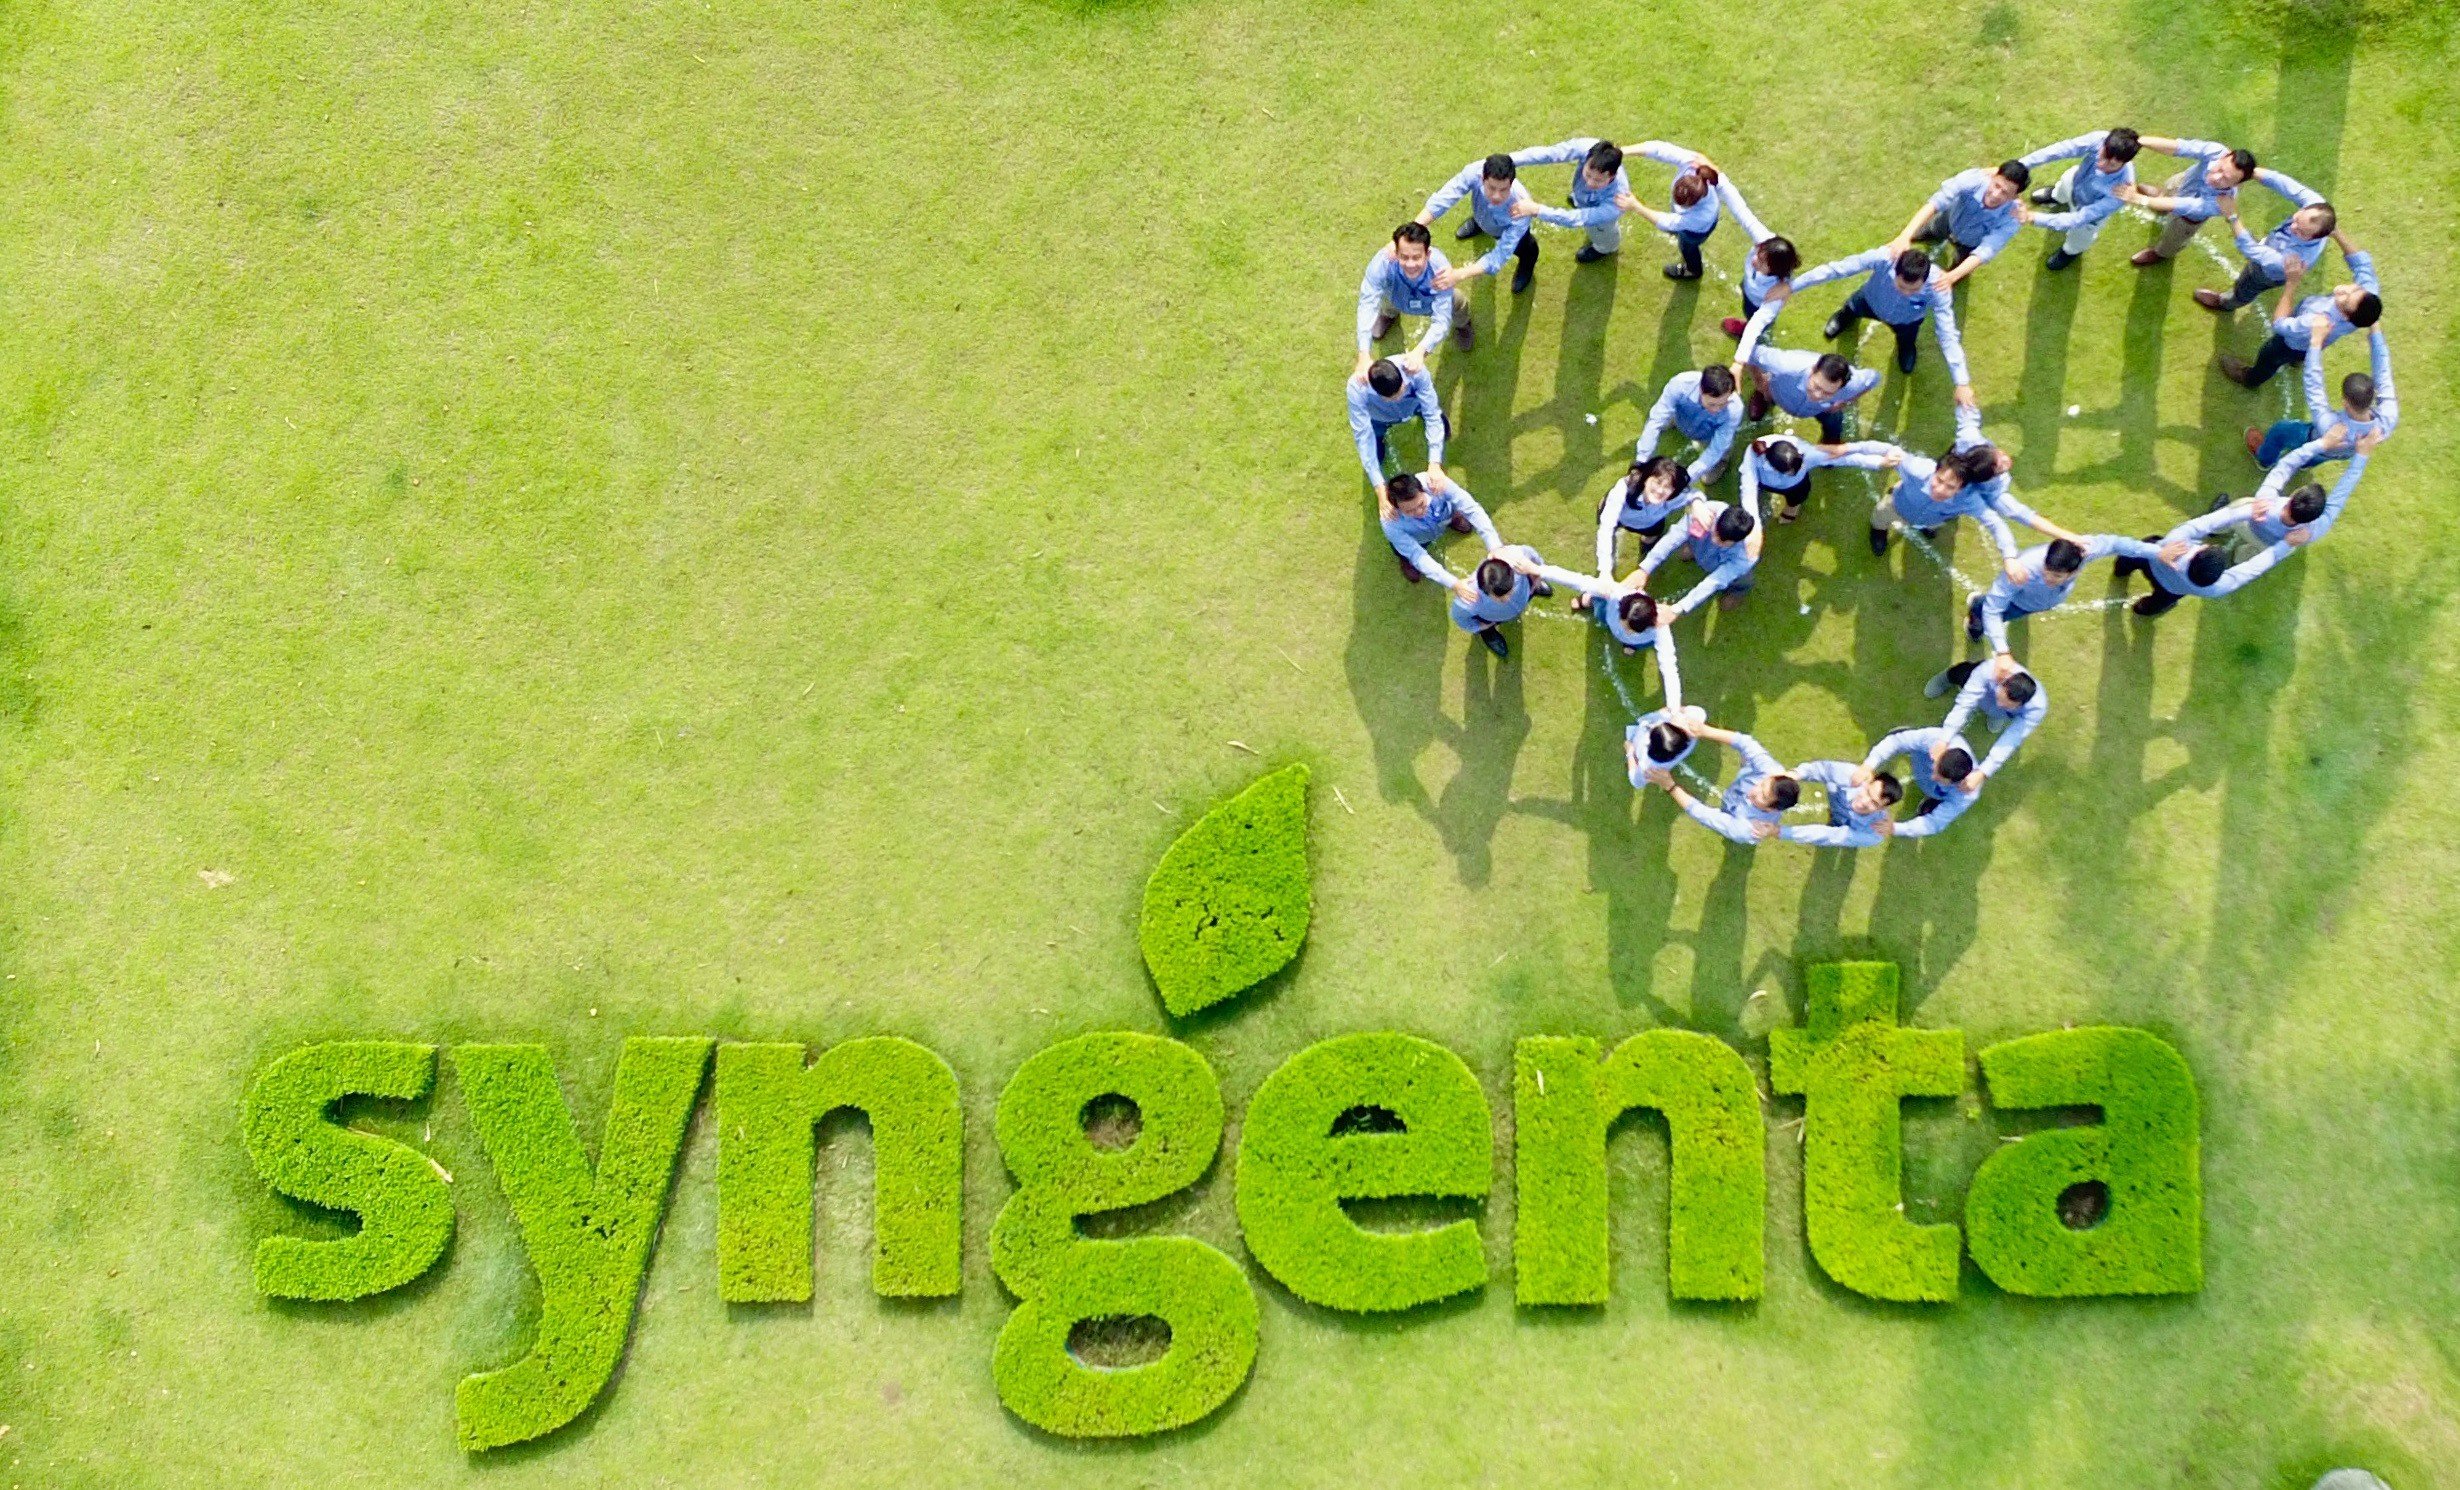 ESEC implements the project “Active Harmonic Control Solution” for Syngenta